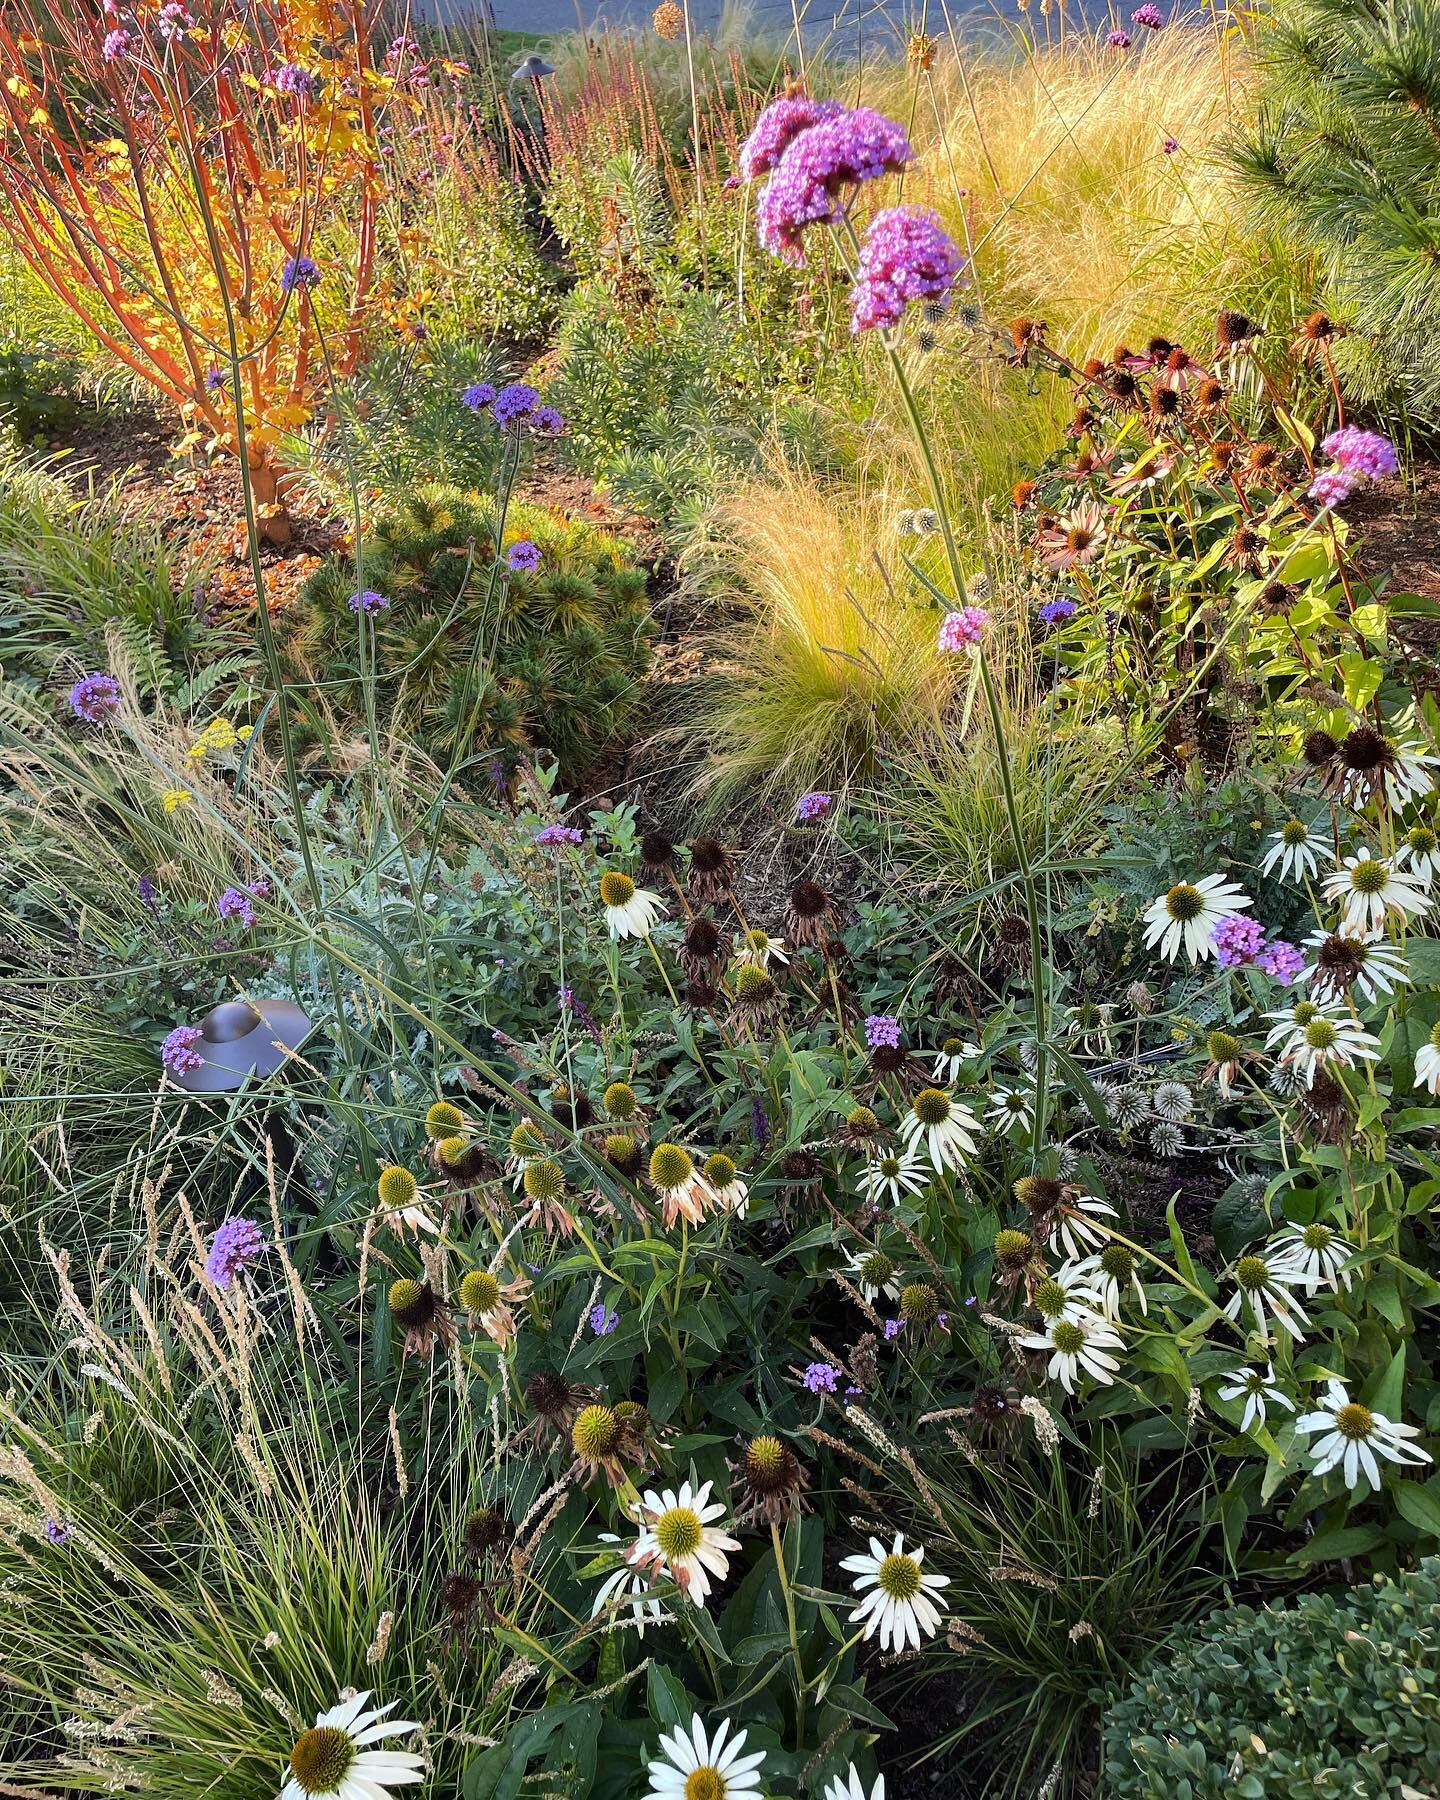 Thrilled with this planting we laid out and planted earlier this year!
.
.
.
.
.
.
.
.
.
#plants #perennialgarden #perennials #green #landscapedesign #gardendesign #gardendesigner #gardendesignerofinstagram #fall #autumn #aesethetic #garden #gardenli